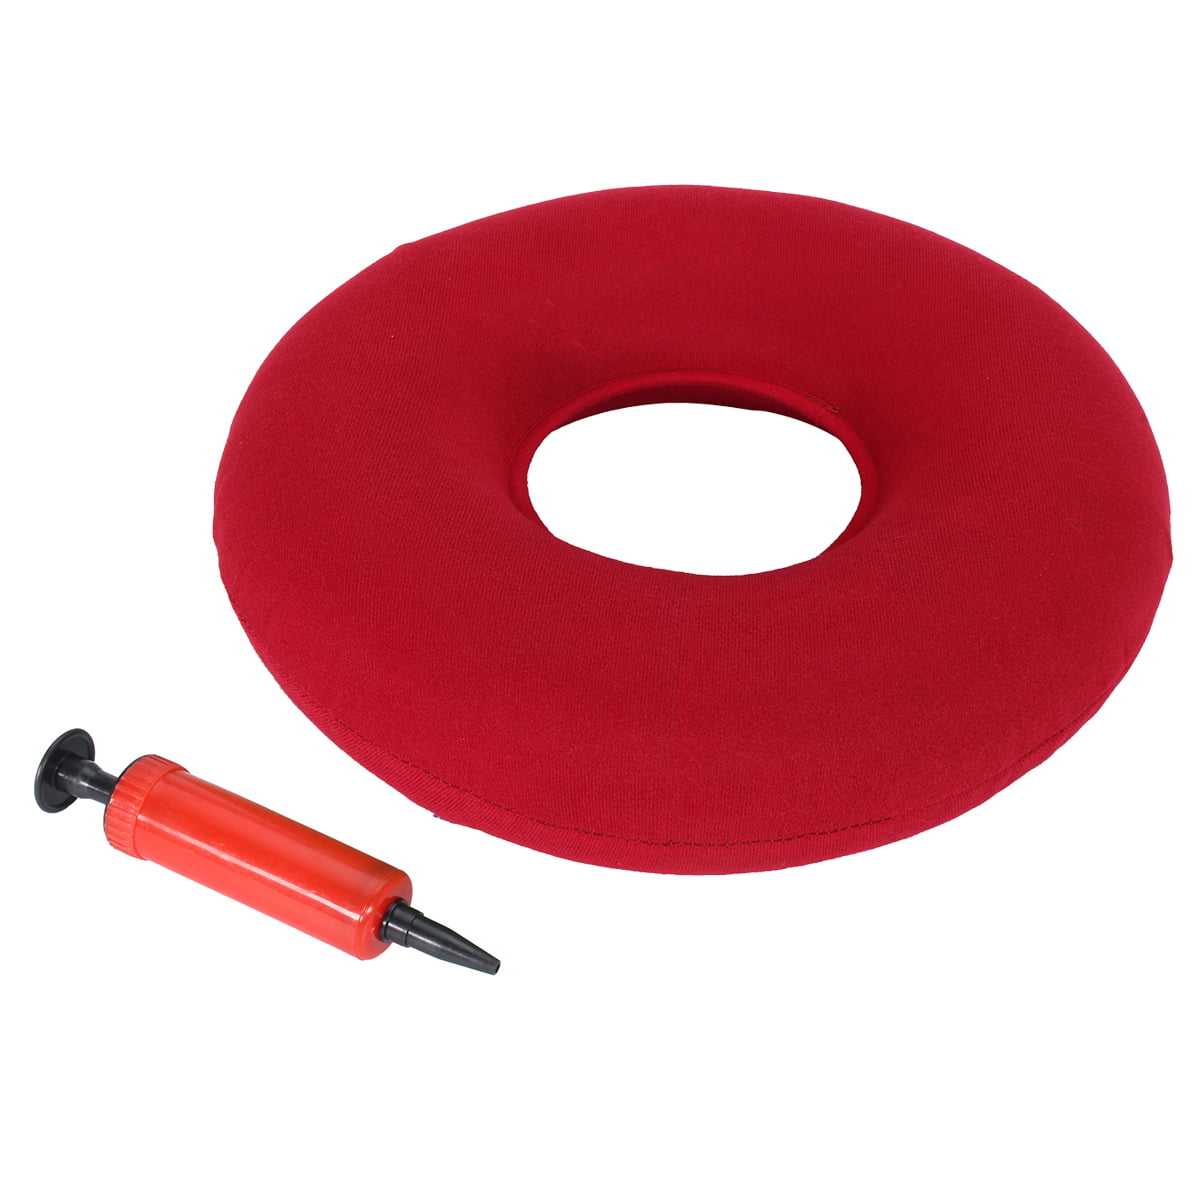 Grey Inflatable Ring Cushion with A Pump Hemorrhoid Seat Pillow Donut Pillow Cushion for Home,Car or Office Round Wheelchairs Seat Cushion 